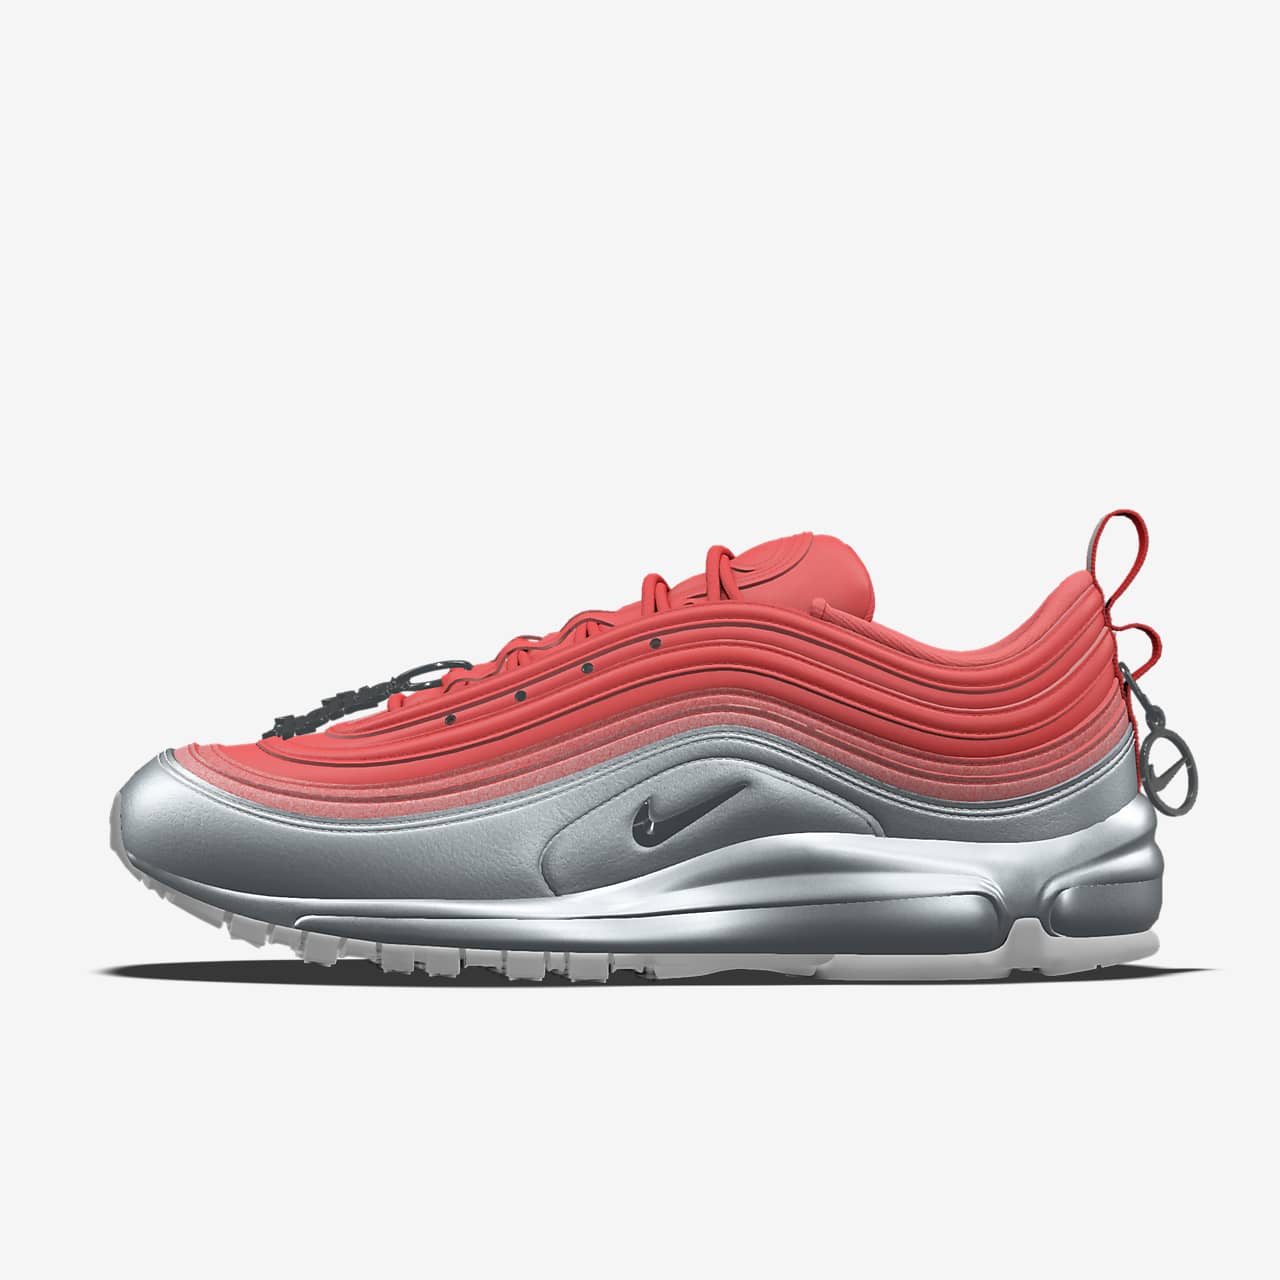 Nike Air Max 97 "Hot Girl" By You Personalisierbarer Schuh